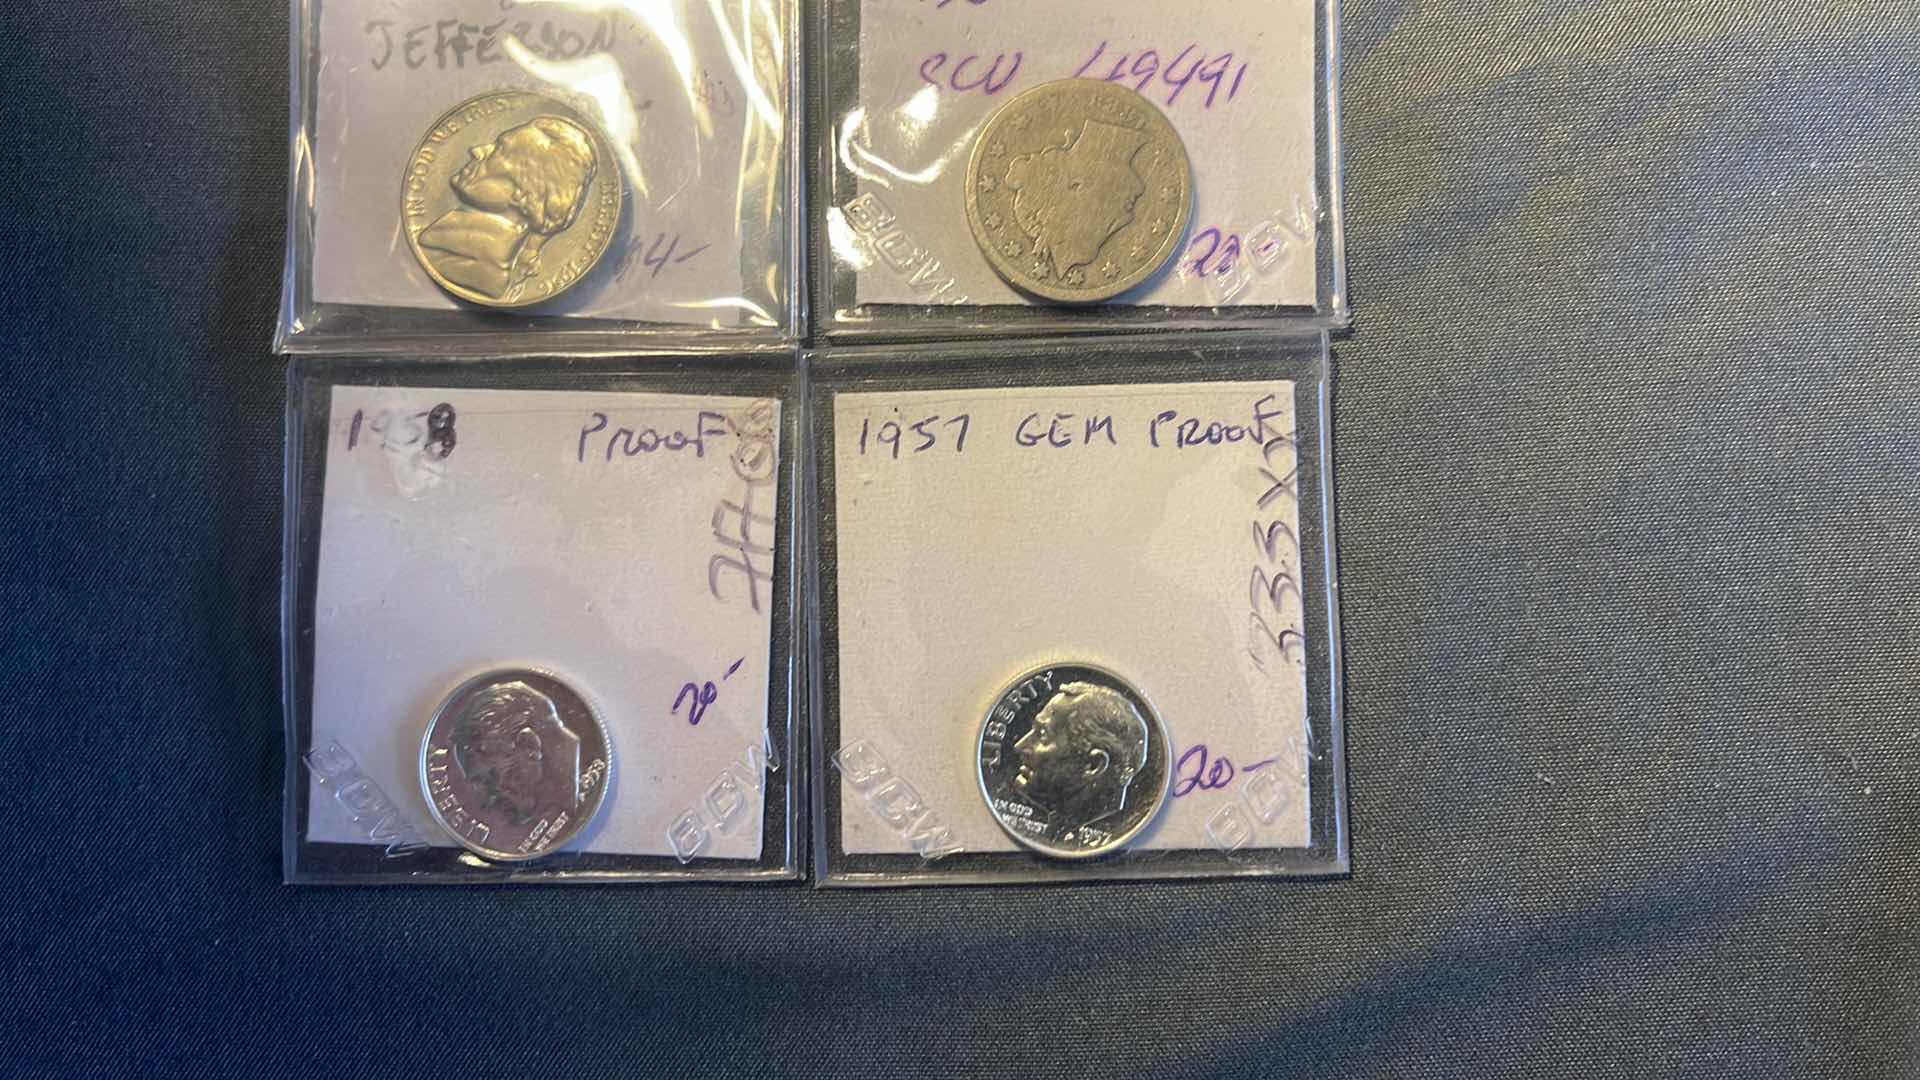 Photo 3 of 4 RARE UNITED STATES COLLECTOR COINS